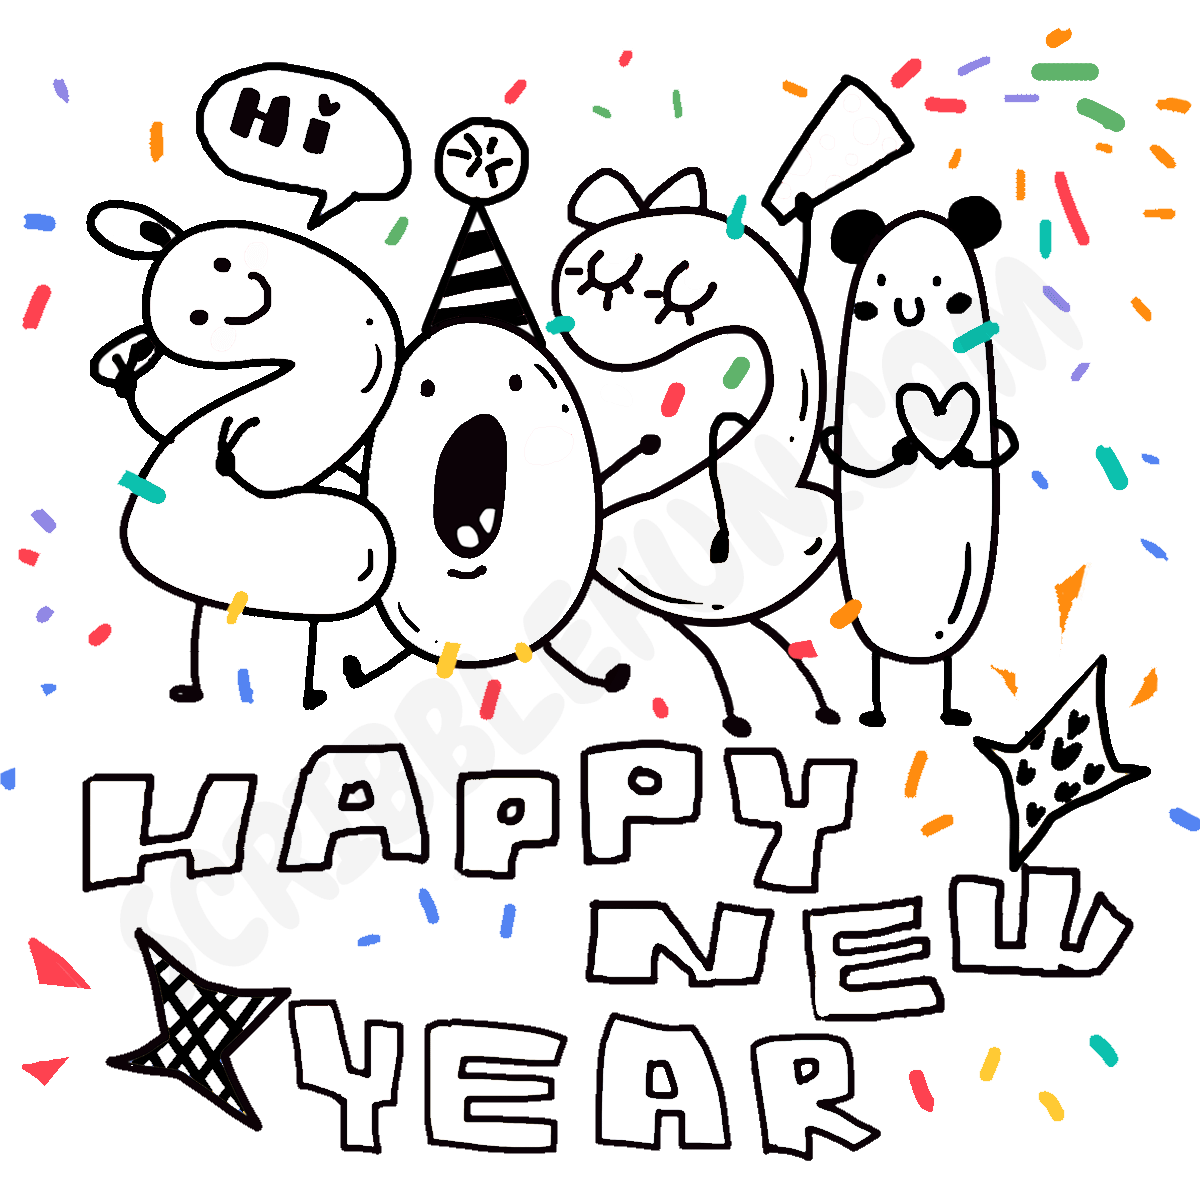 New Year 2021 coloring image